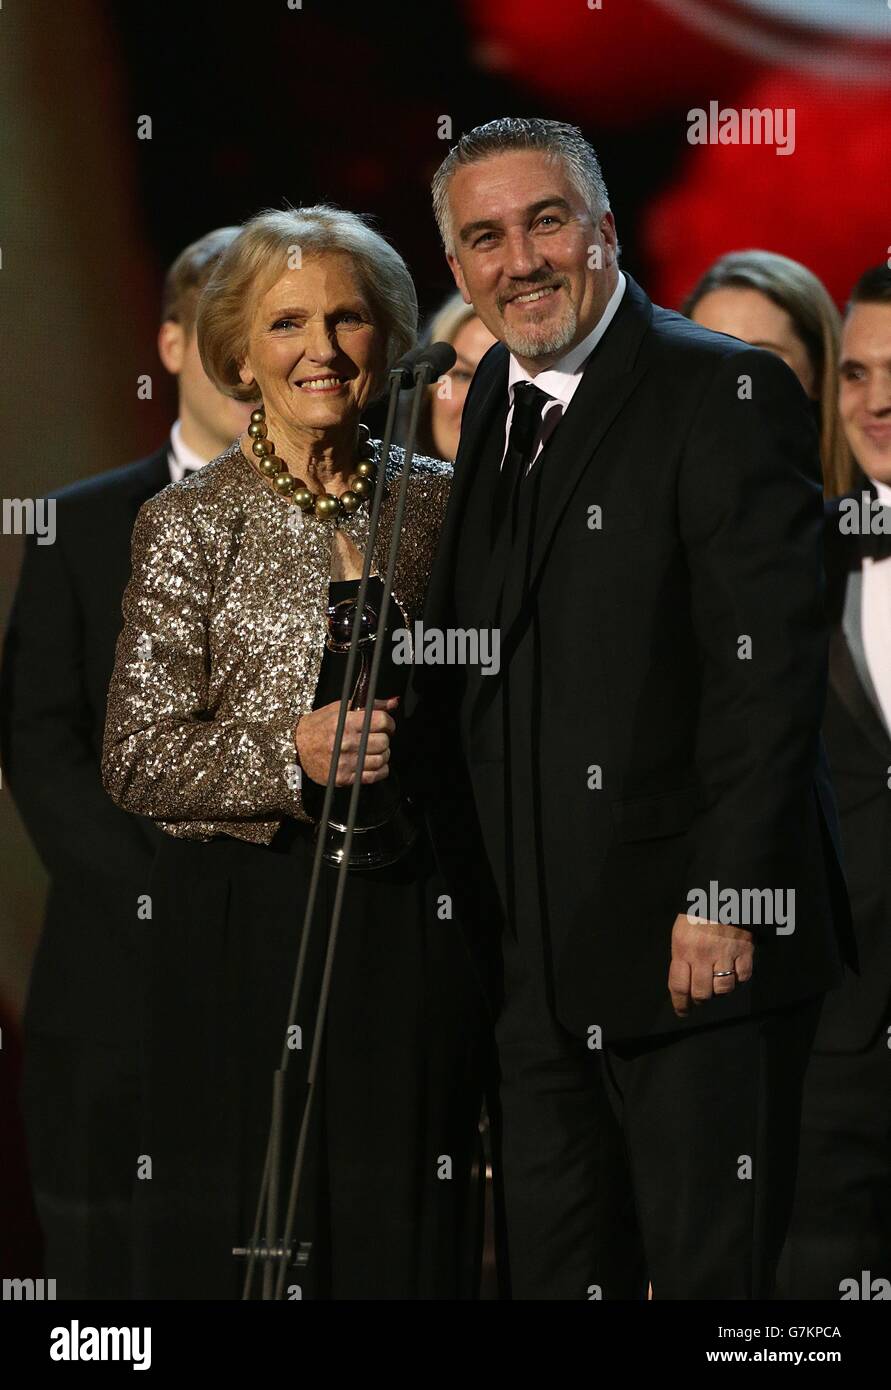 Paul Hollywood and Mary Berry win the Best Factual Entertainment Award for The Great British Bake off during the 2015 National Television Awards at the O2 Arena, London. Stock Photo